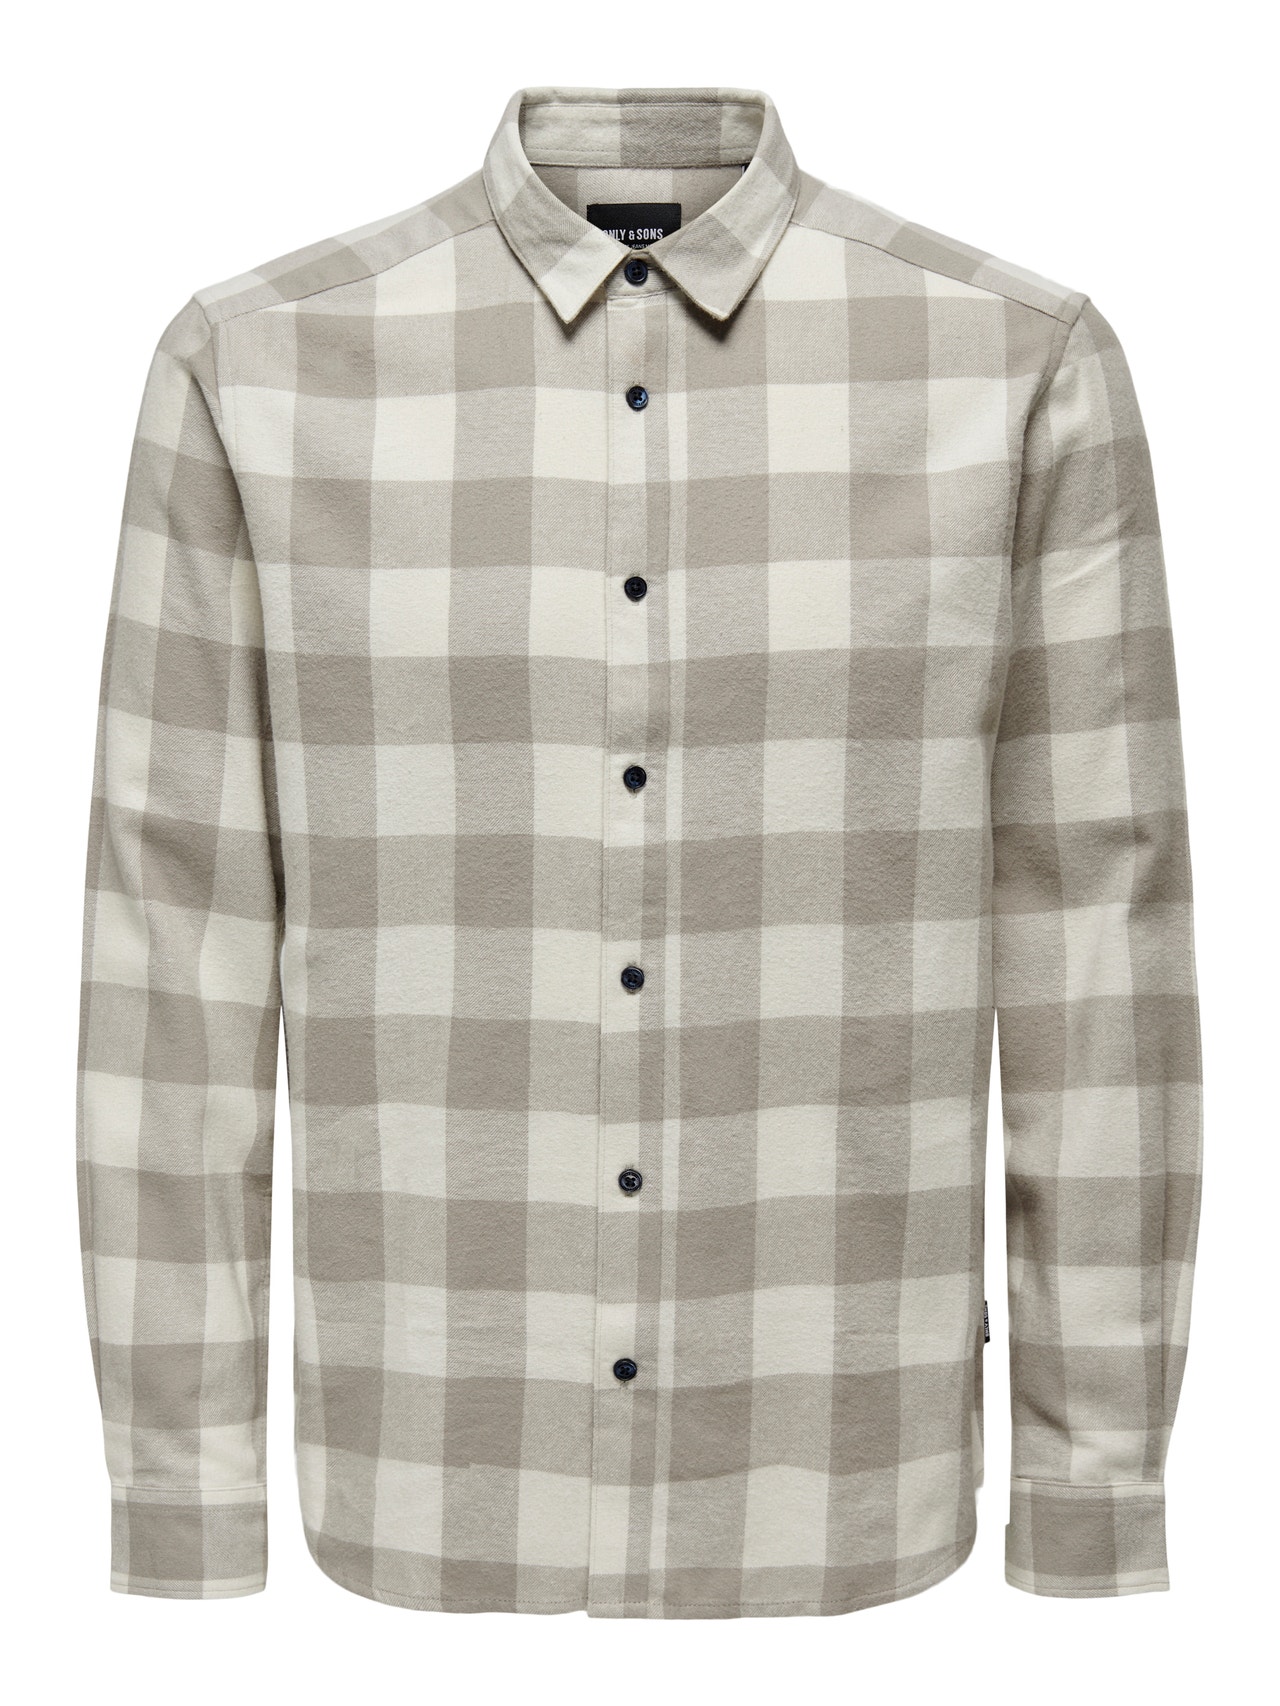 ONLY & SONS Slim fit checked shirt -Antique White - 22007112